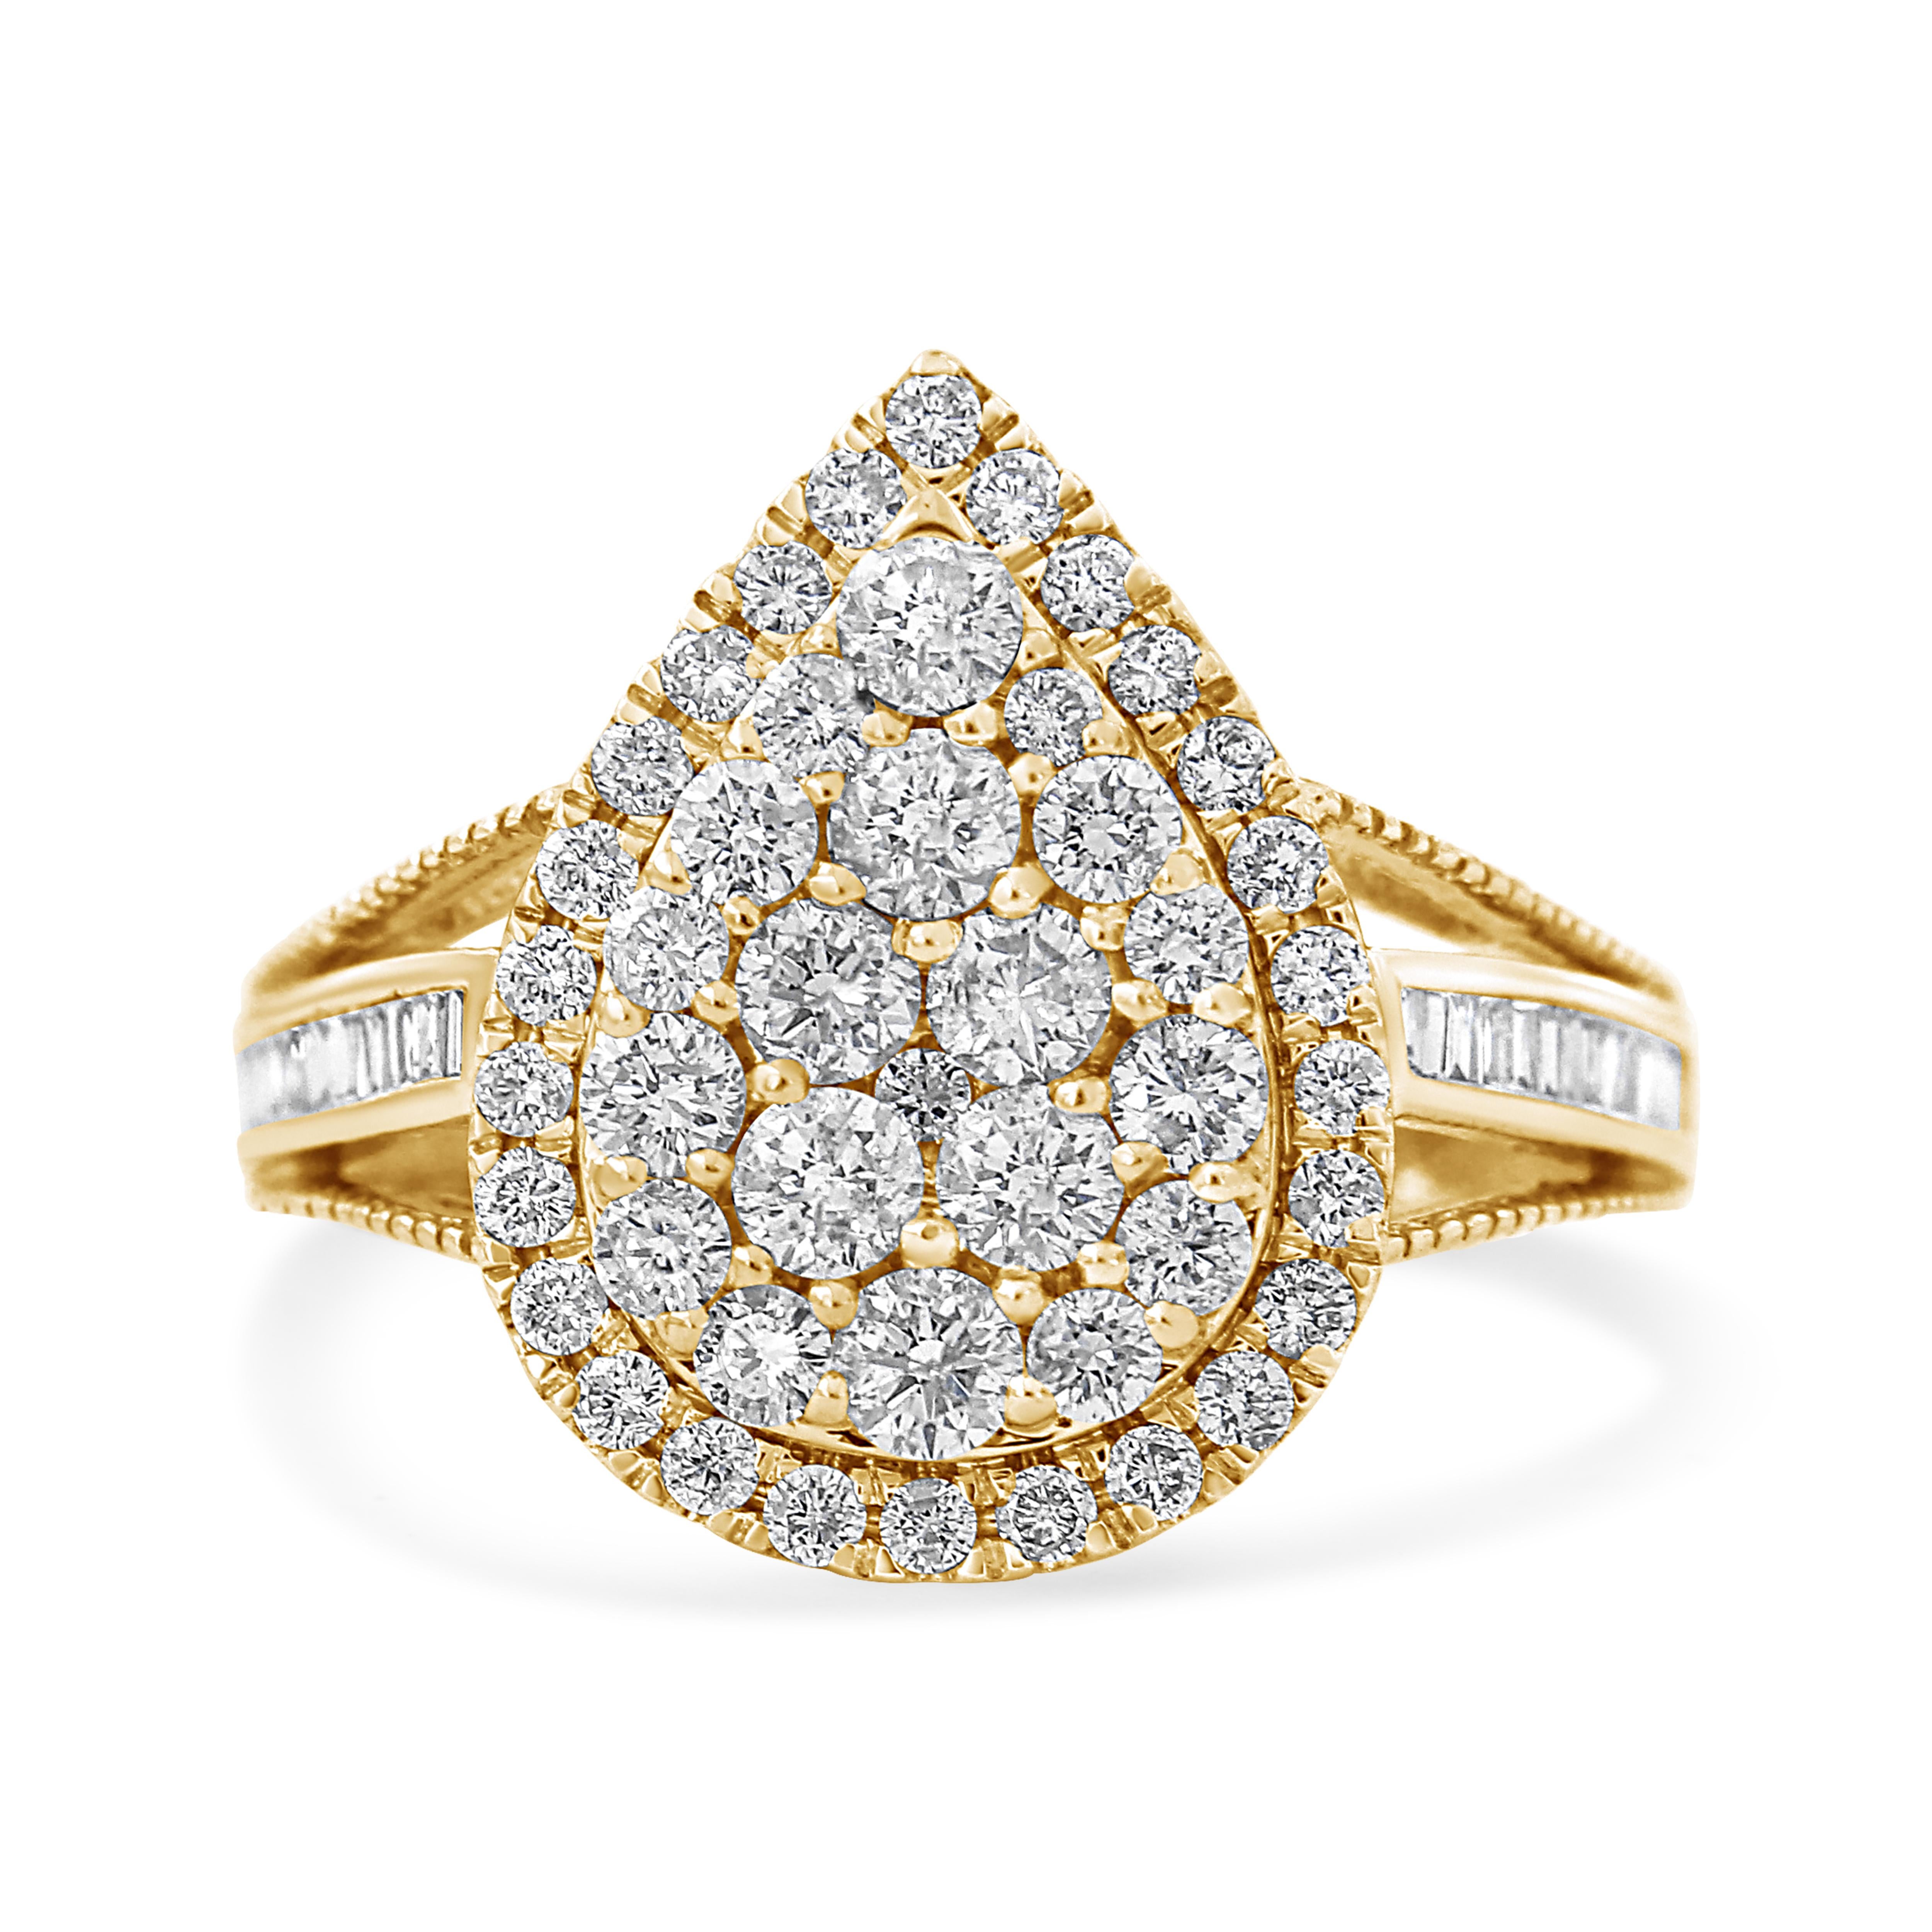 For Sale:  10K Yellow Gold over Silver 1 1/2 Carat Round-Cut Diamond Cocktail Ring 2